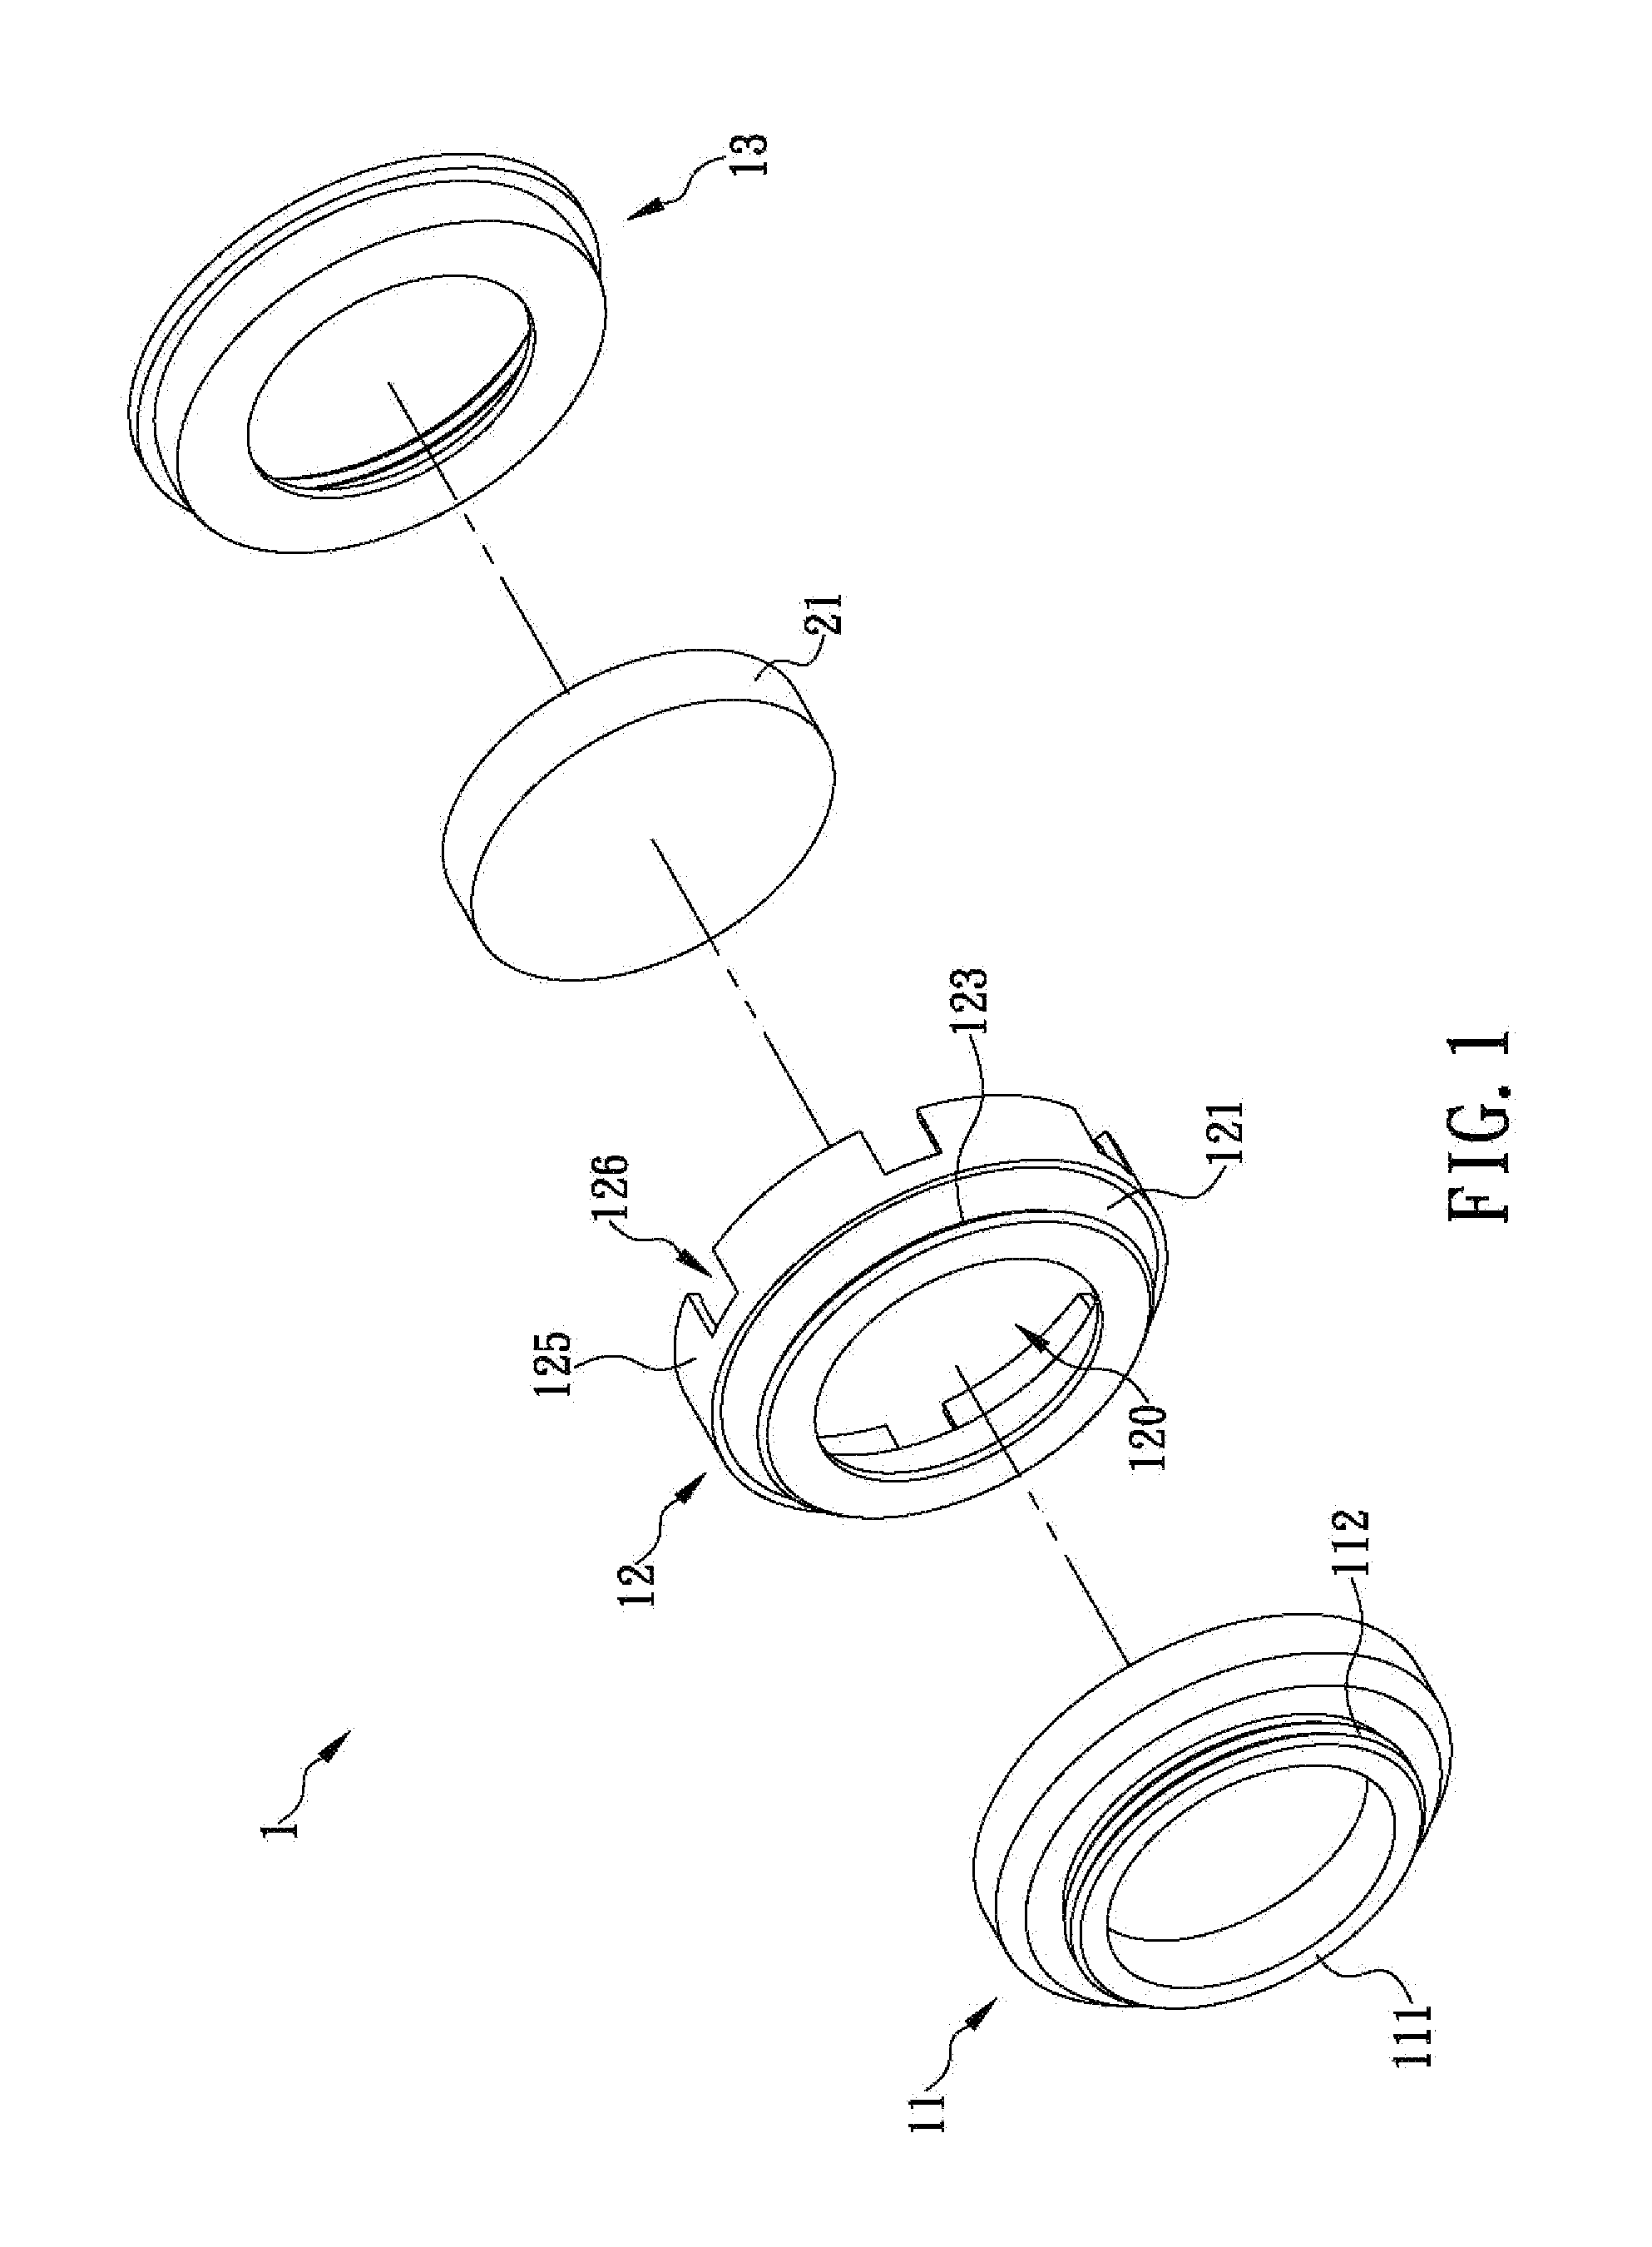 Pivotally connected structure allowing lens replacement and lens angle adjustment